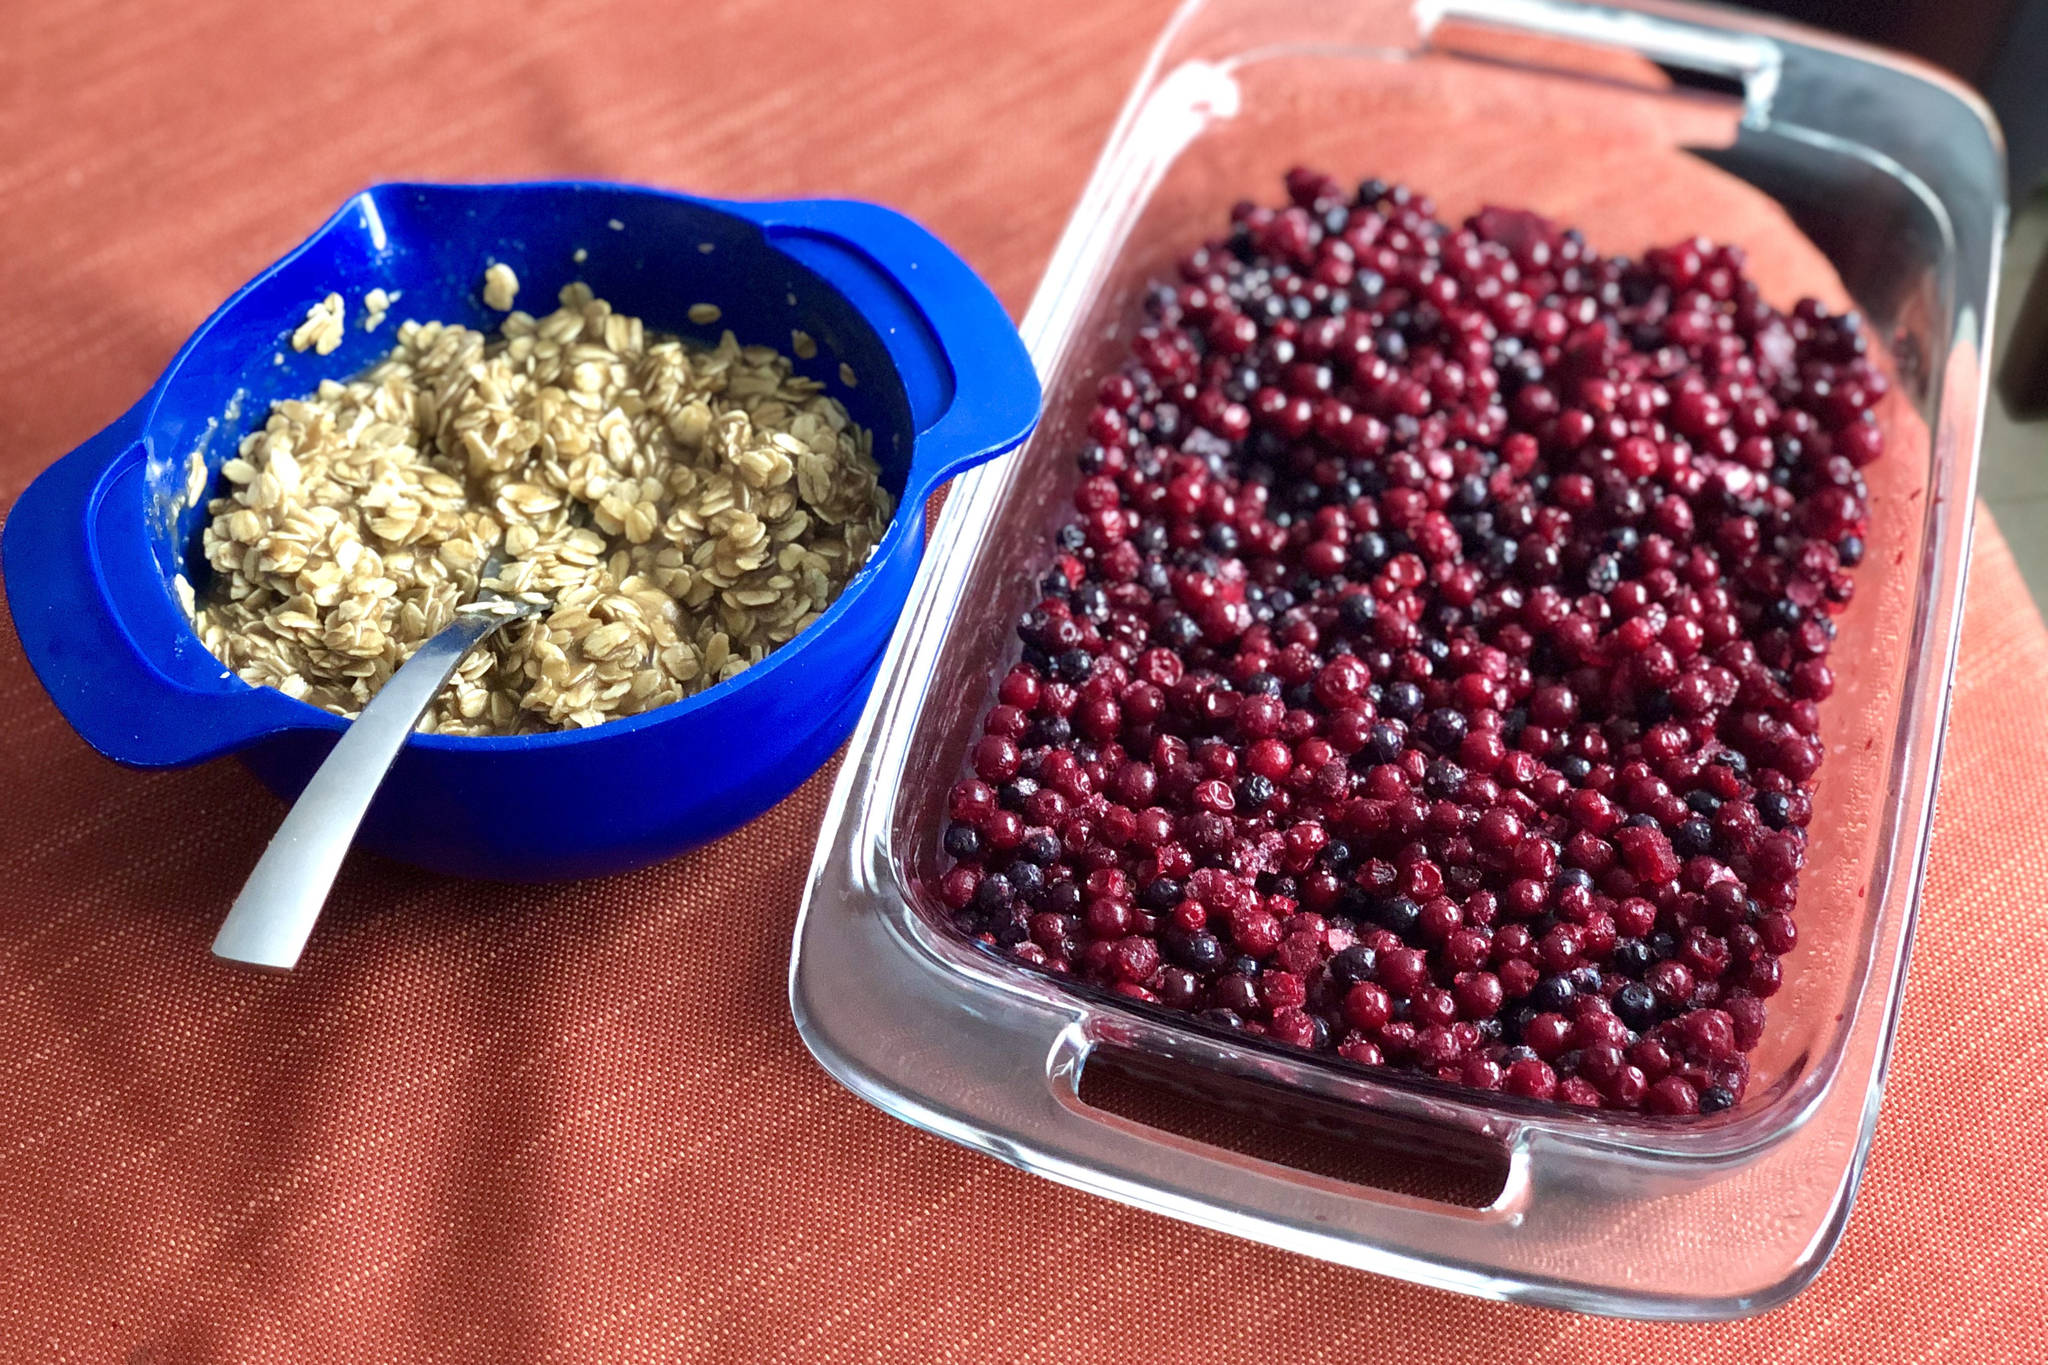 Getting my ingredients ready for blueberry crumble, where the berries can be prepared right in the pan and the topping in a small bowl, on Tuesday, Feb. 16, 2021, in Anchorage, Alaska (Photo by Victoria Petersen/Peninsula Clarion)